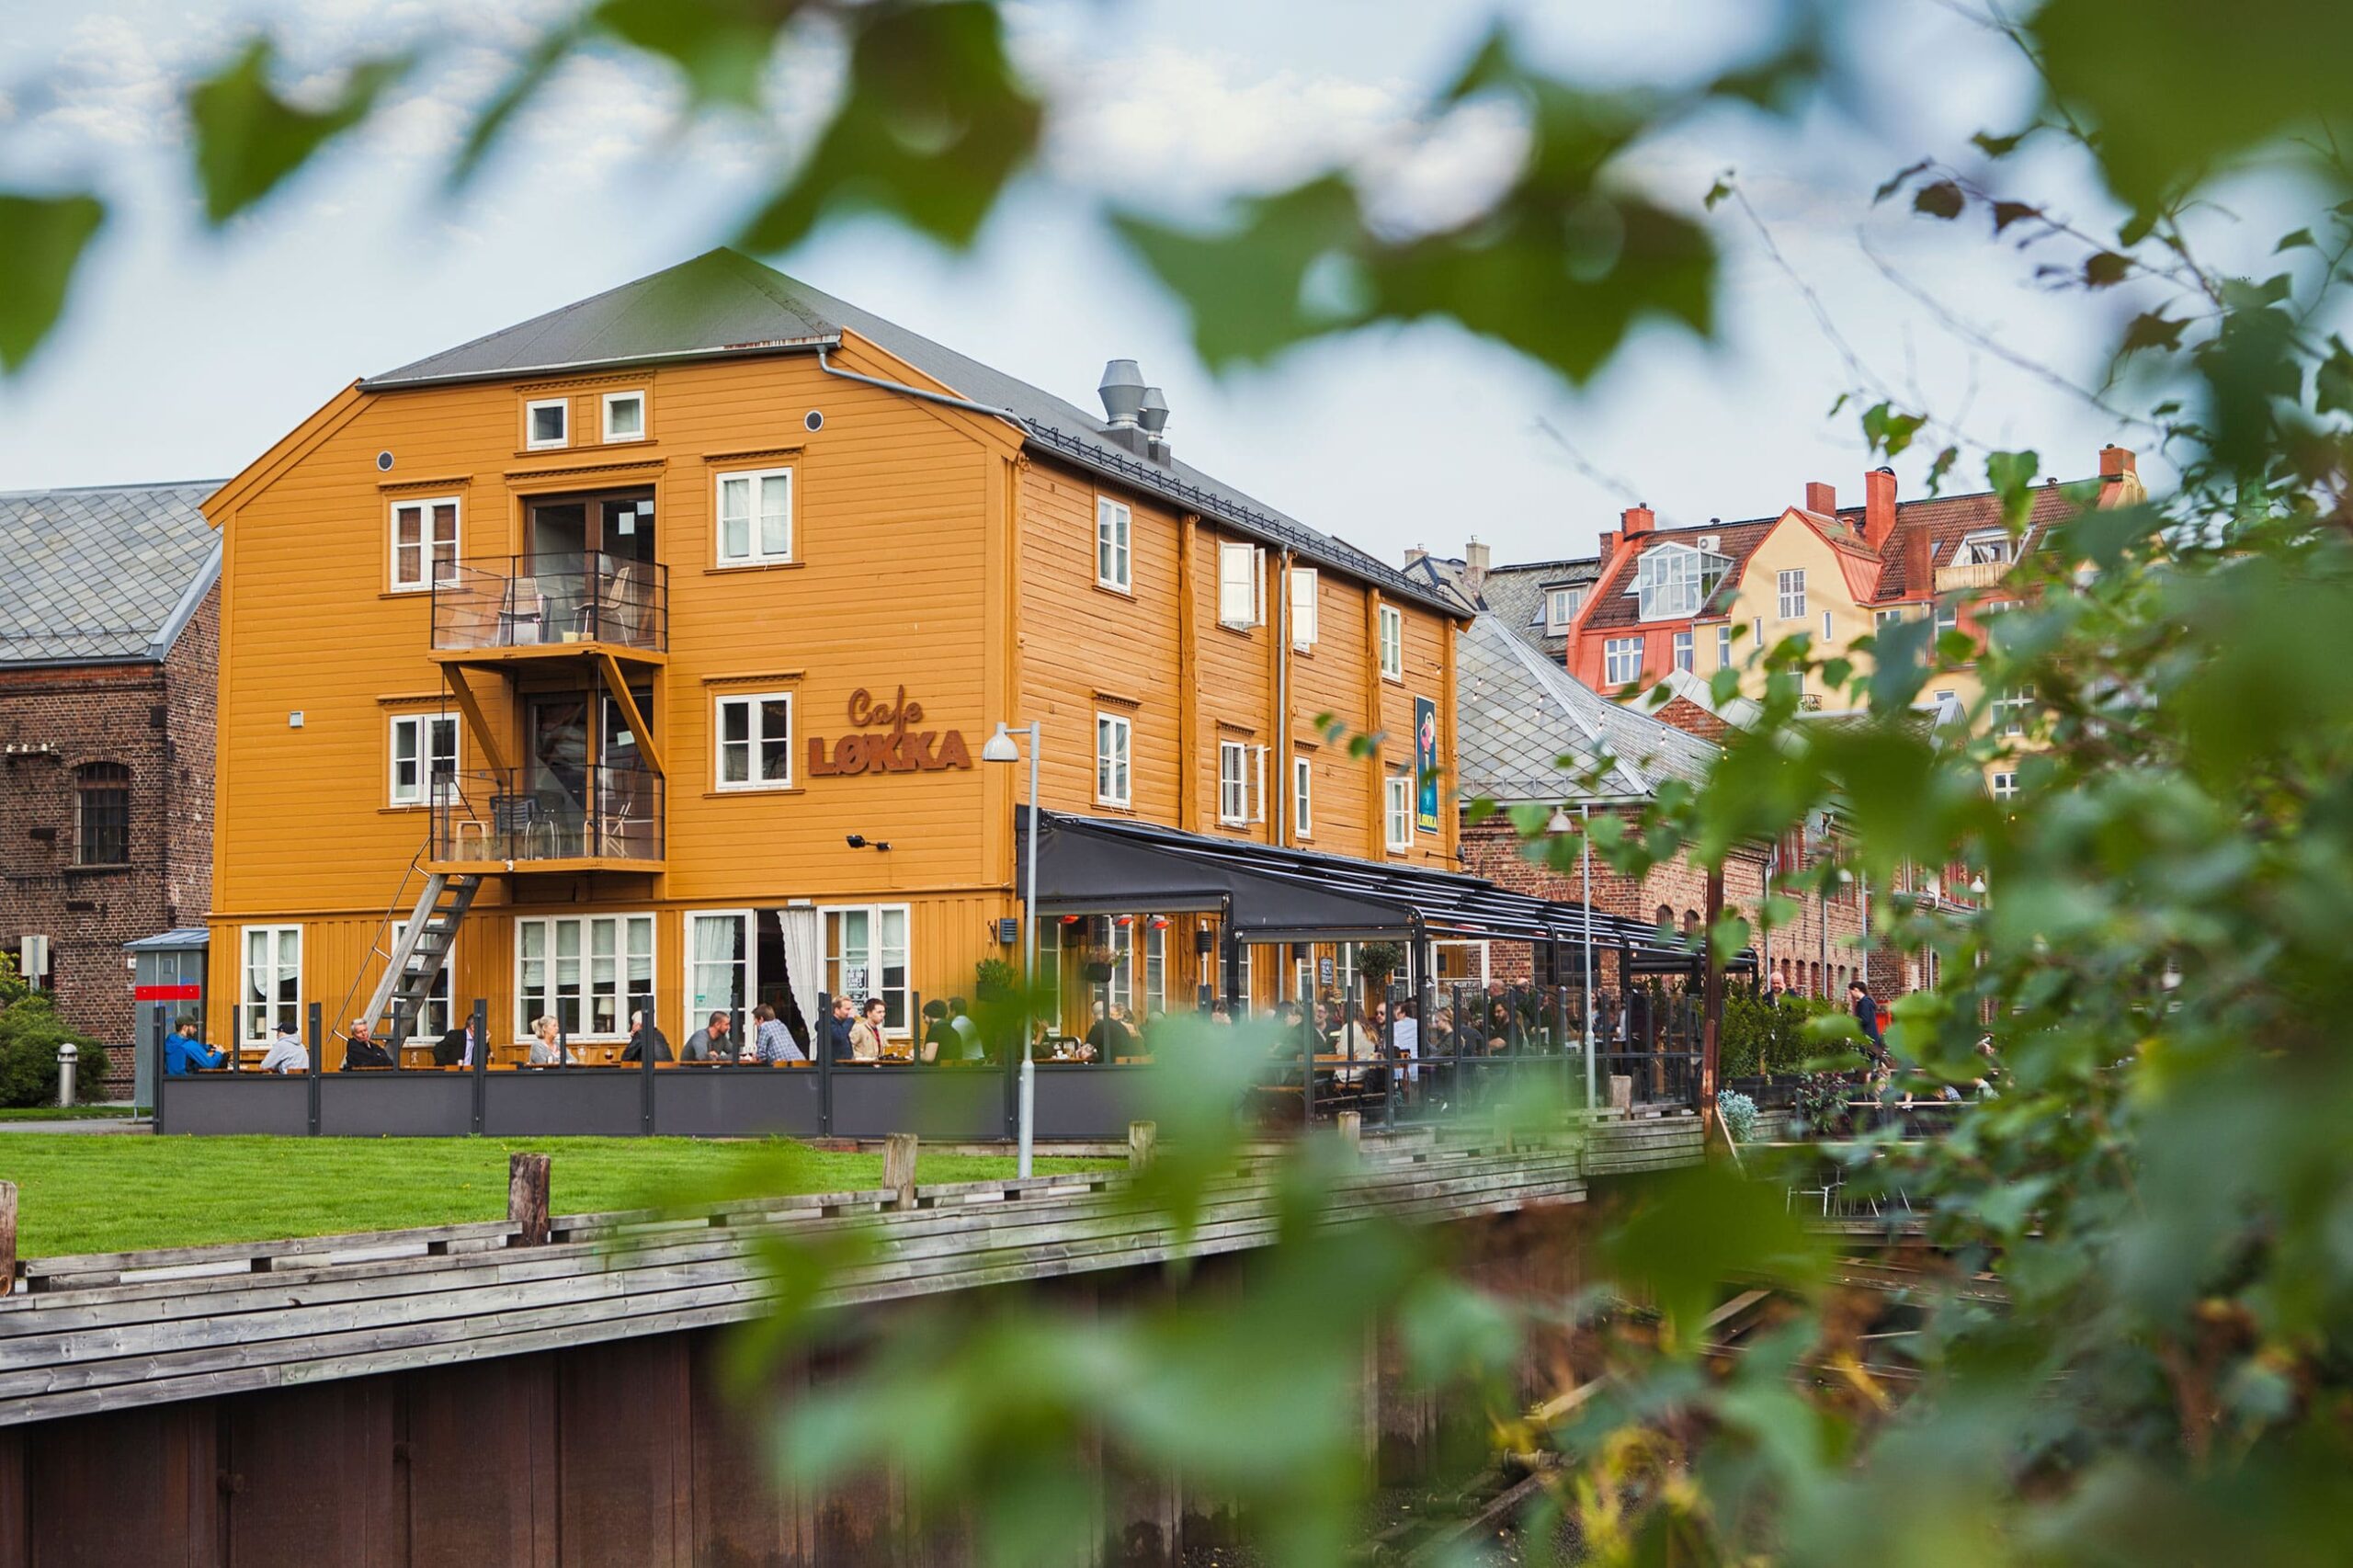 Featured image for “Cafe Løkka”